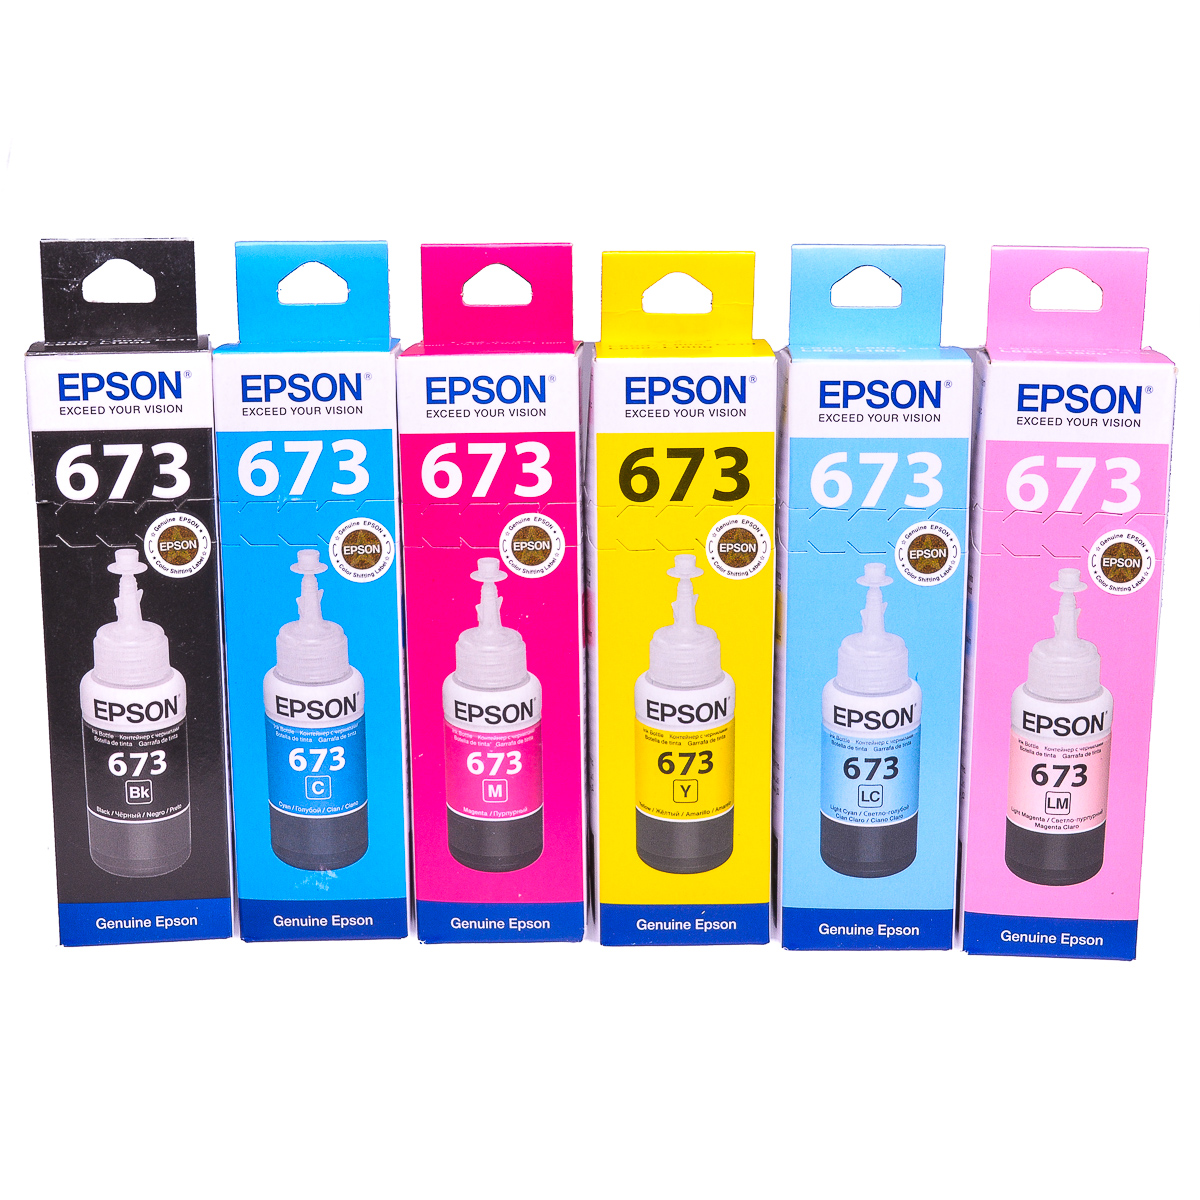 Genuine Multipack ink refill for use with Epson L1800 printer